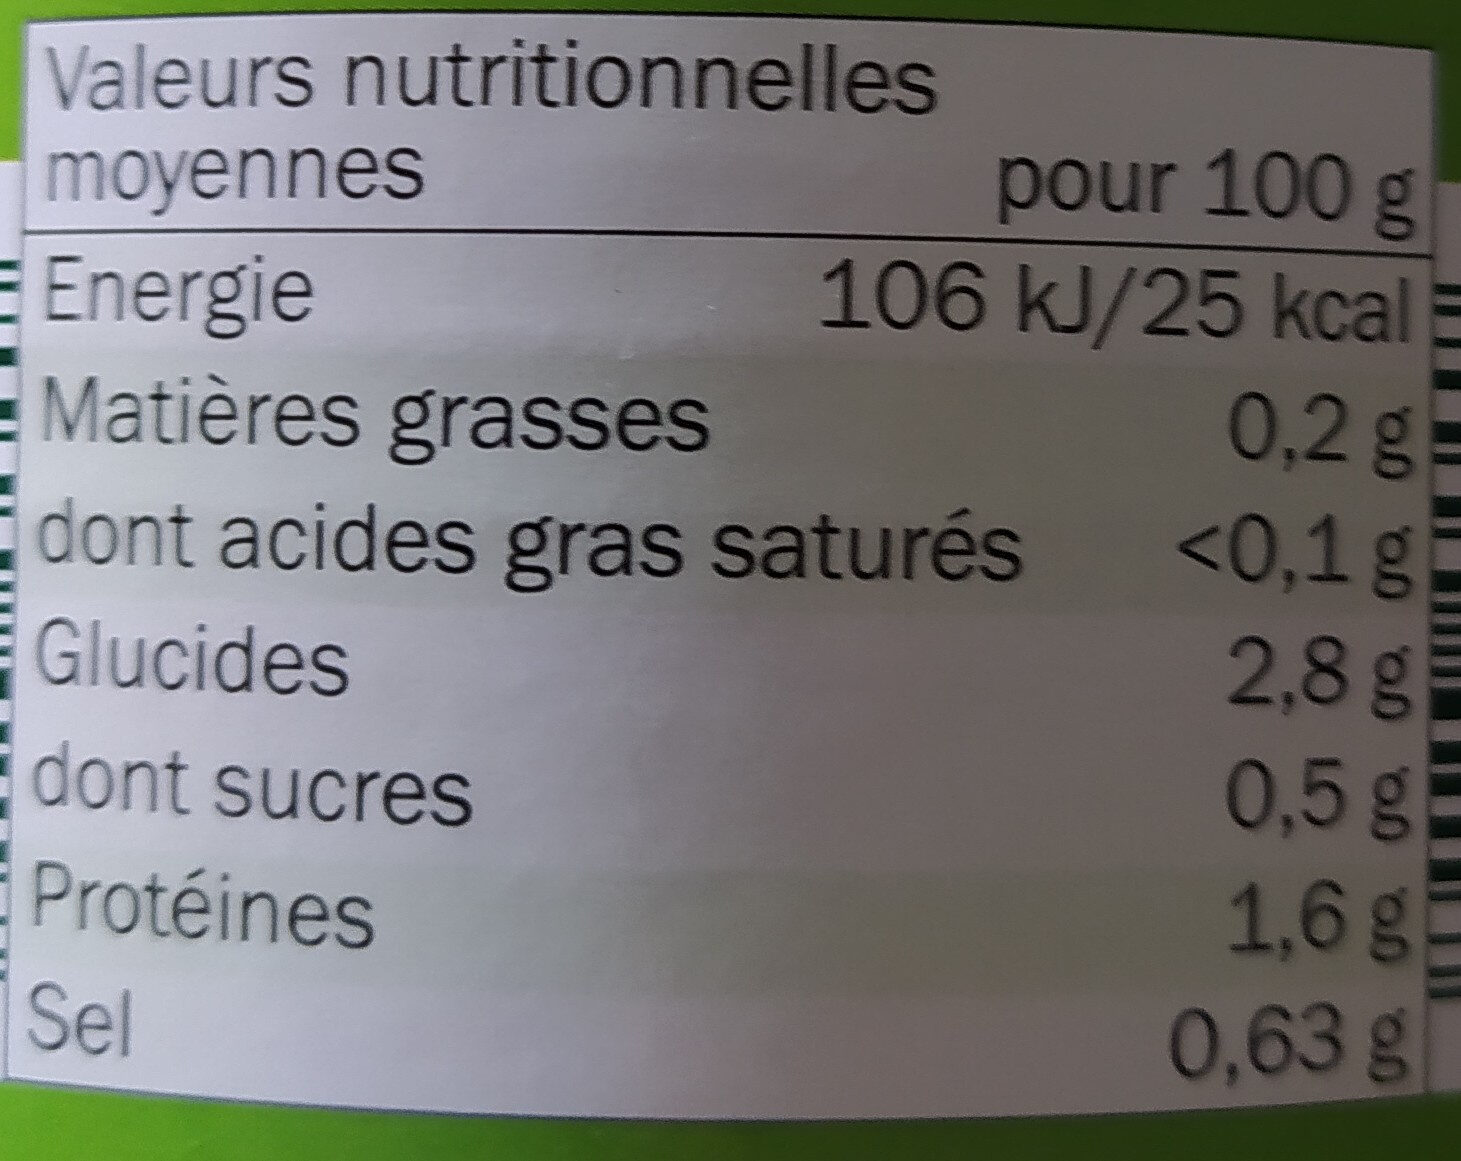 Haricots verts extra fins - Nutrition facts - fr